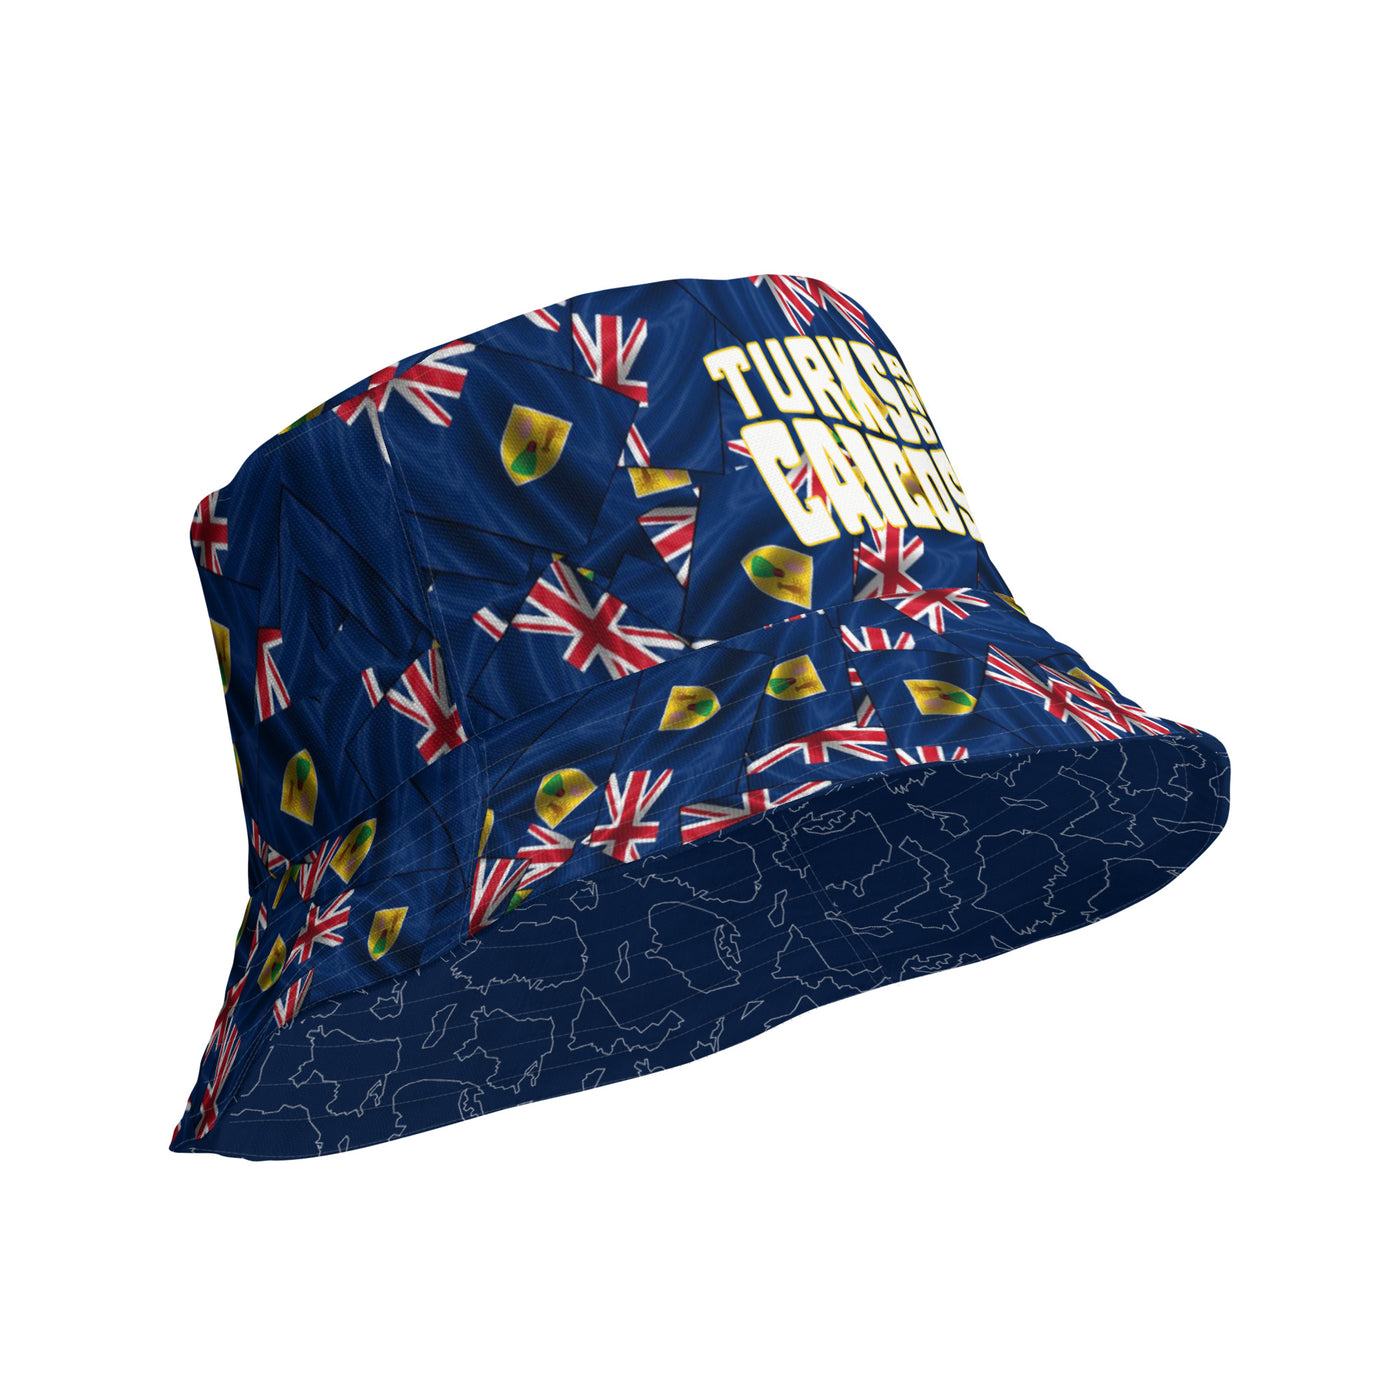 Turks and Caicos Reversible Bucket Hat